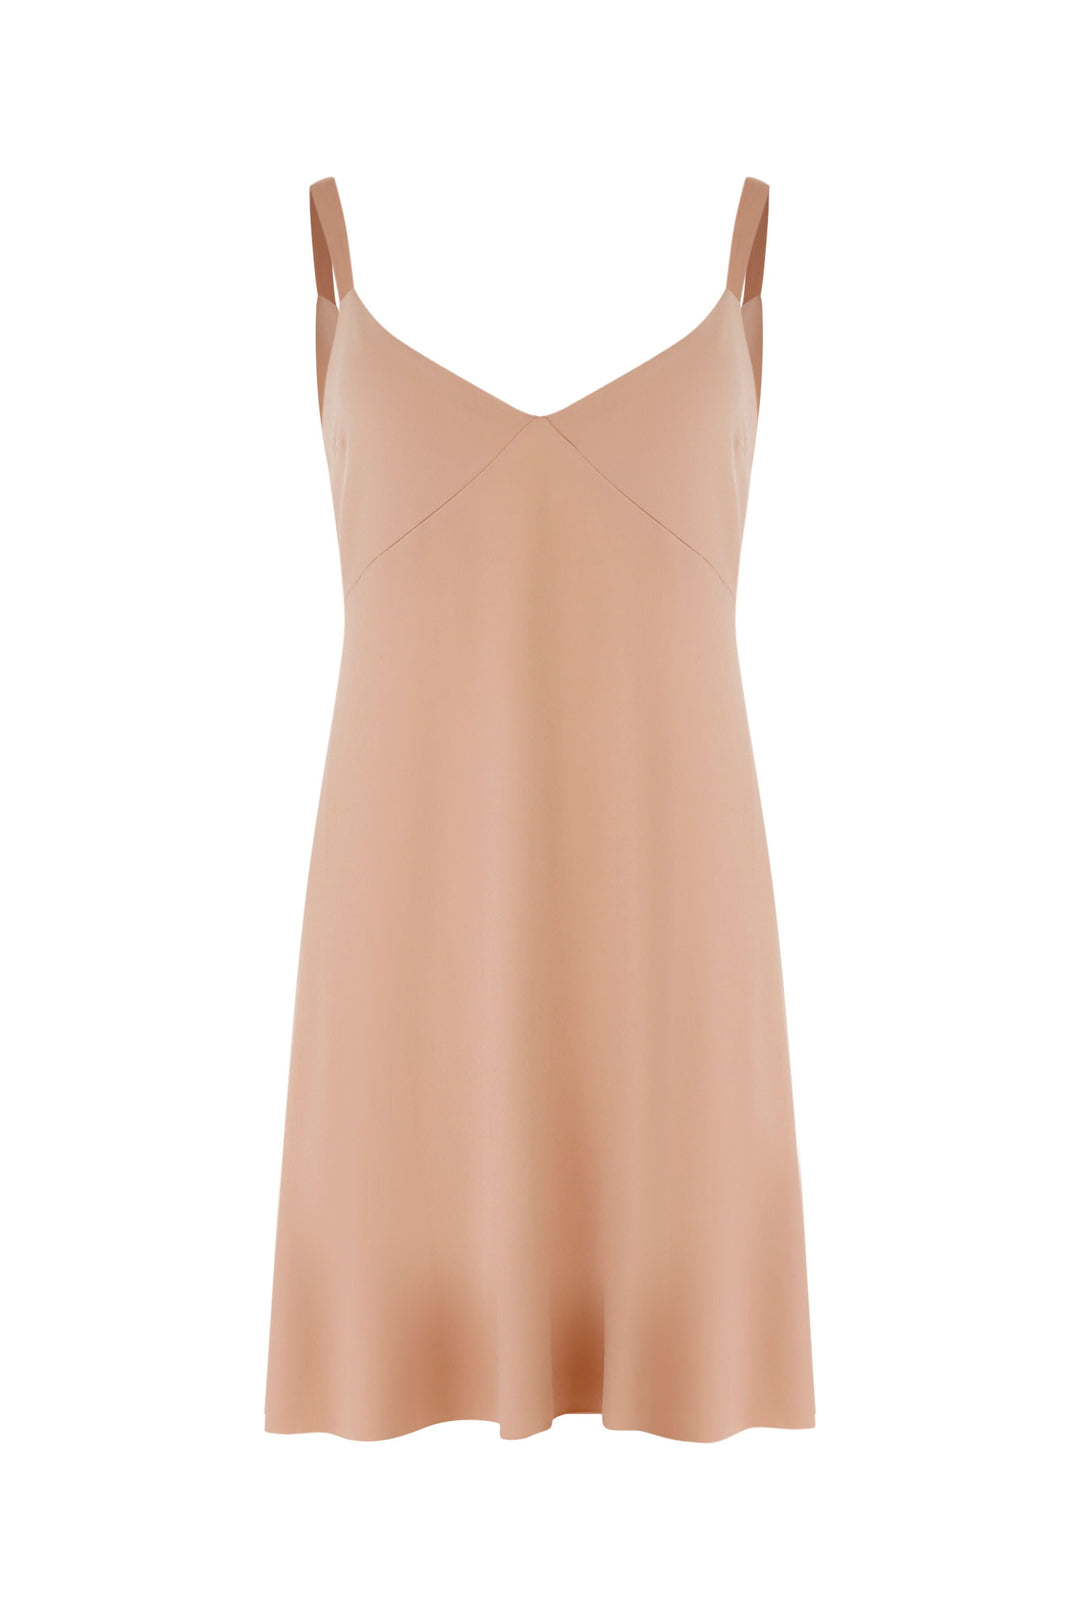 Curate Slip Up Slip - Nude - Shop 9